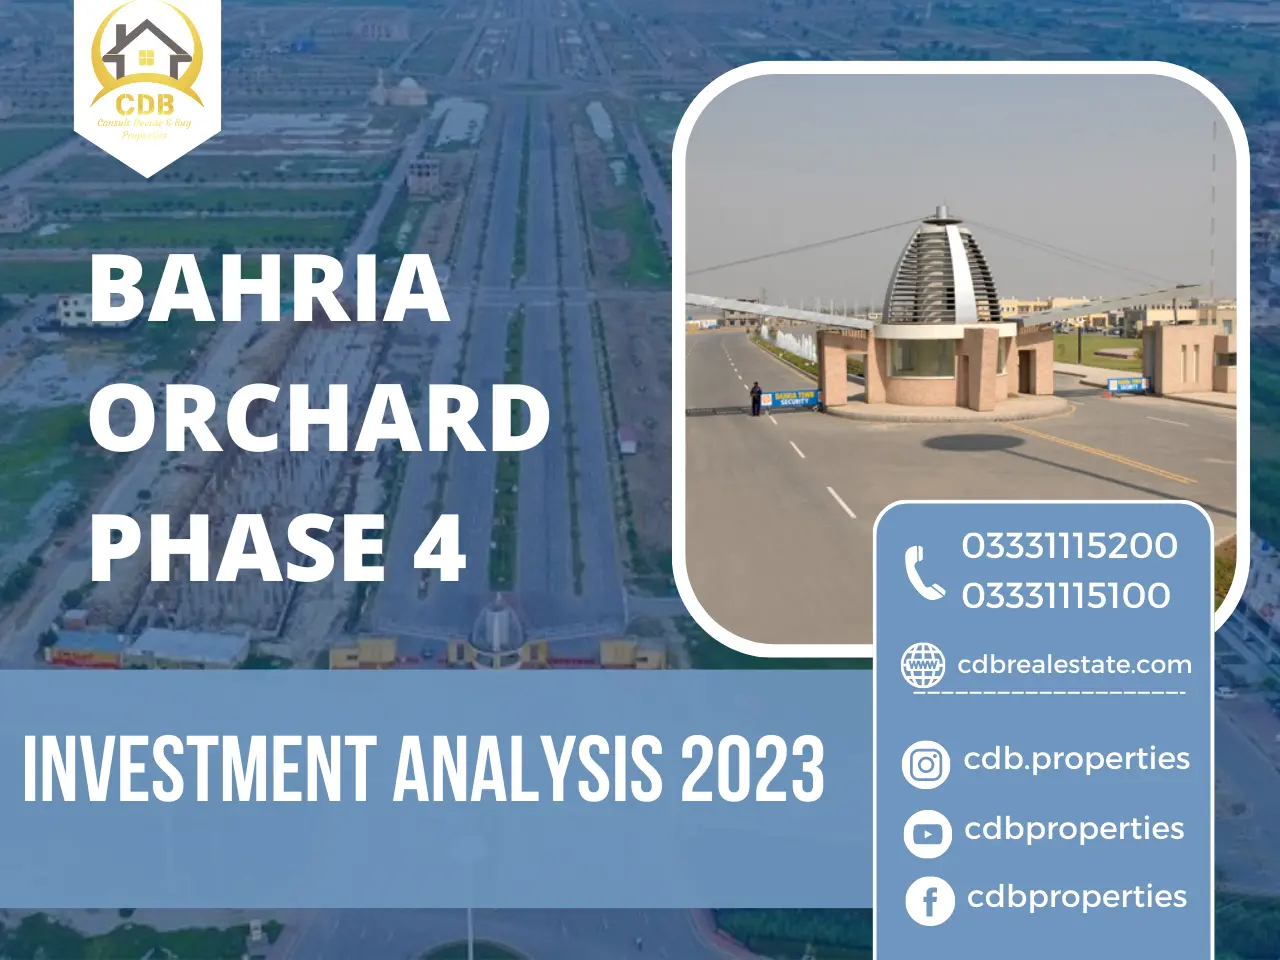 Bahrai Orchard Phase 4 Investment 2023